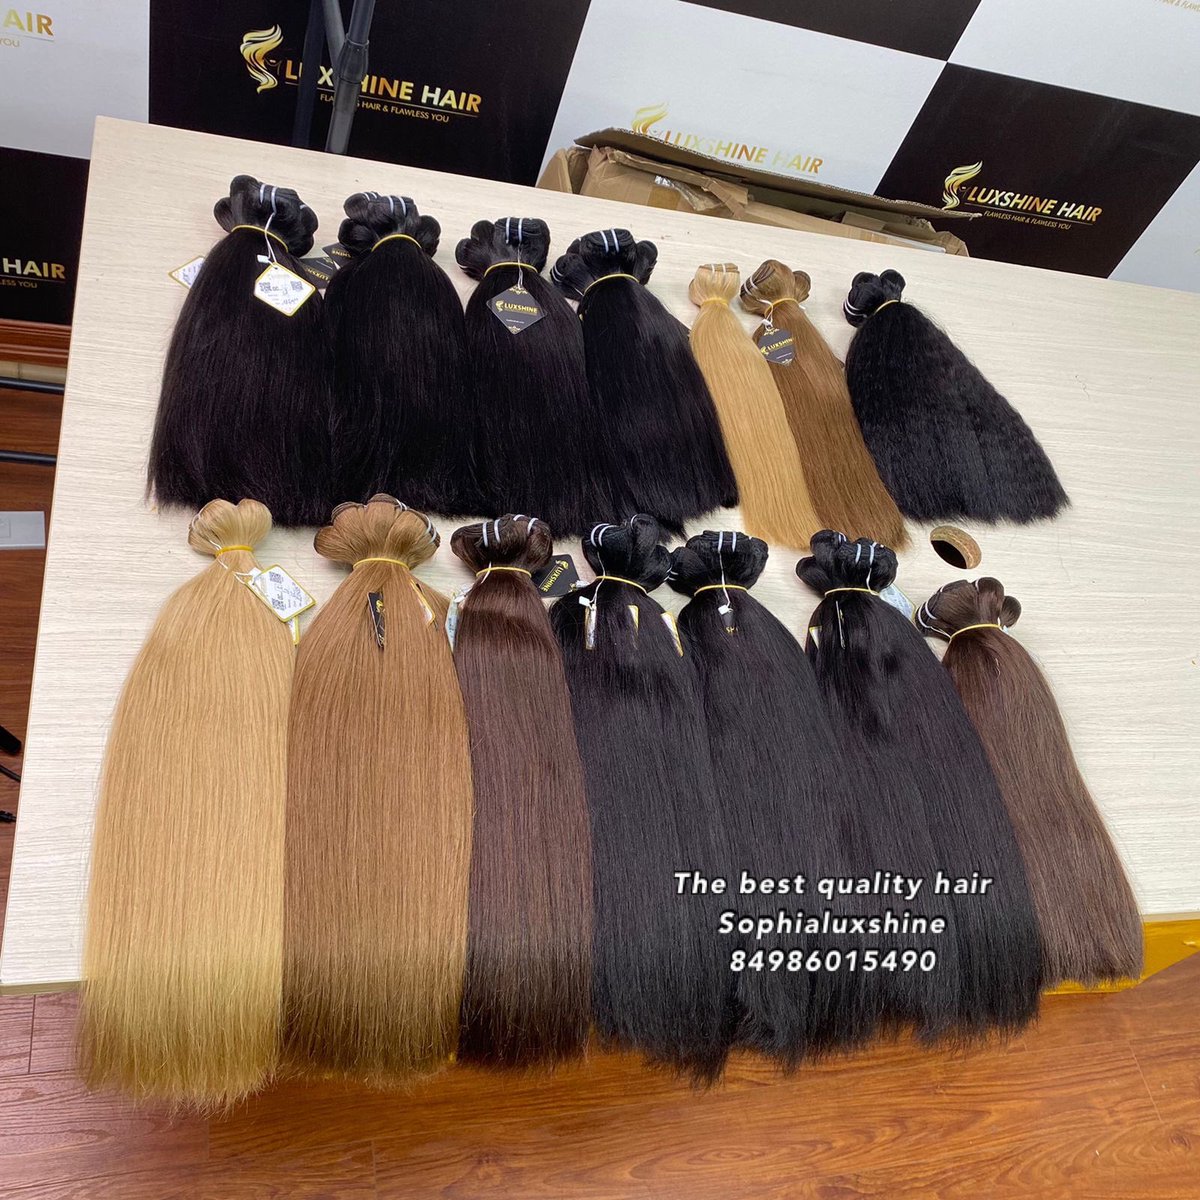 💥SALE UP TO 35% - Top choice for upcoming Halloween and Christmas, with deposit policy from 30%
Ms #sophialuxshine
☎ Wa.me/84986015490
#humanhair #rawhair #virginhair #hairsupplier #hairextentions #hairvendor #hairmanufacturer #weftextensions #wefthair #wefthairextensions